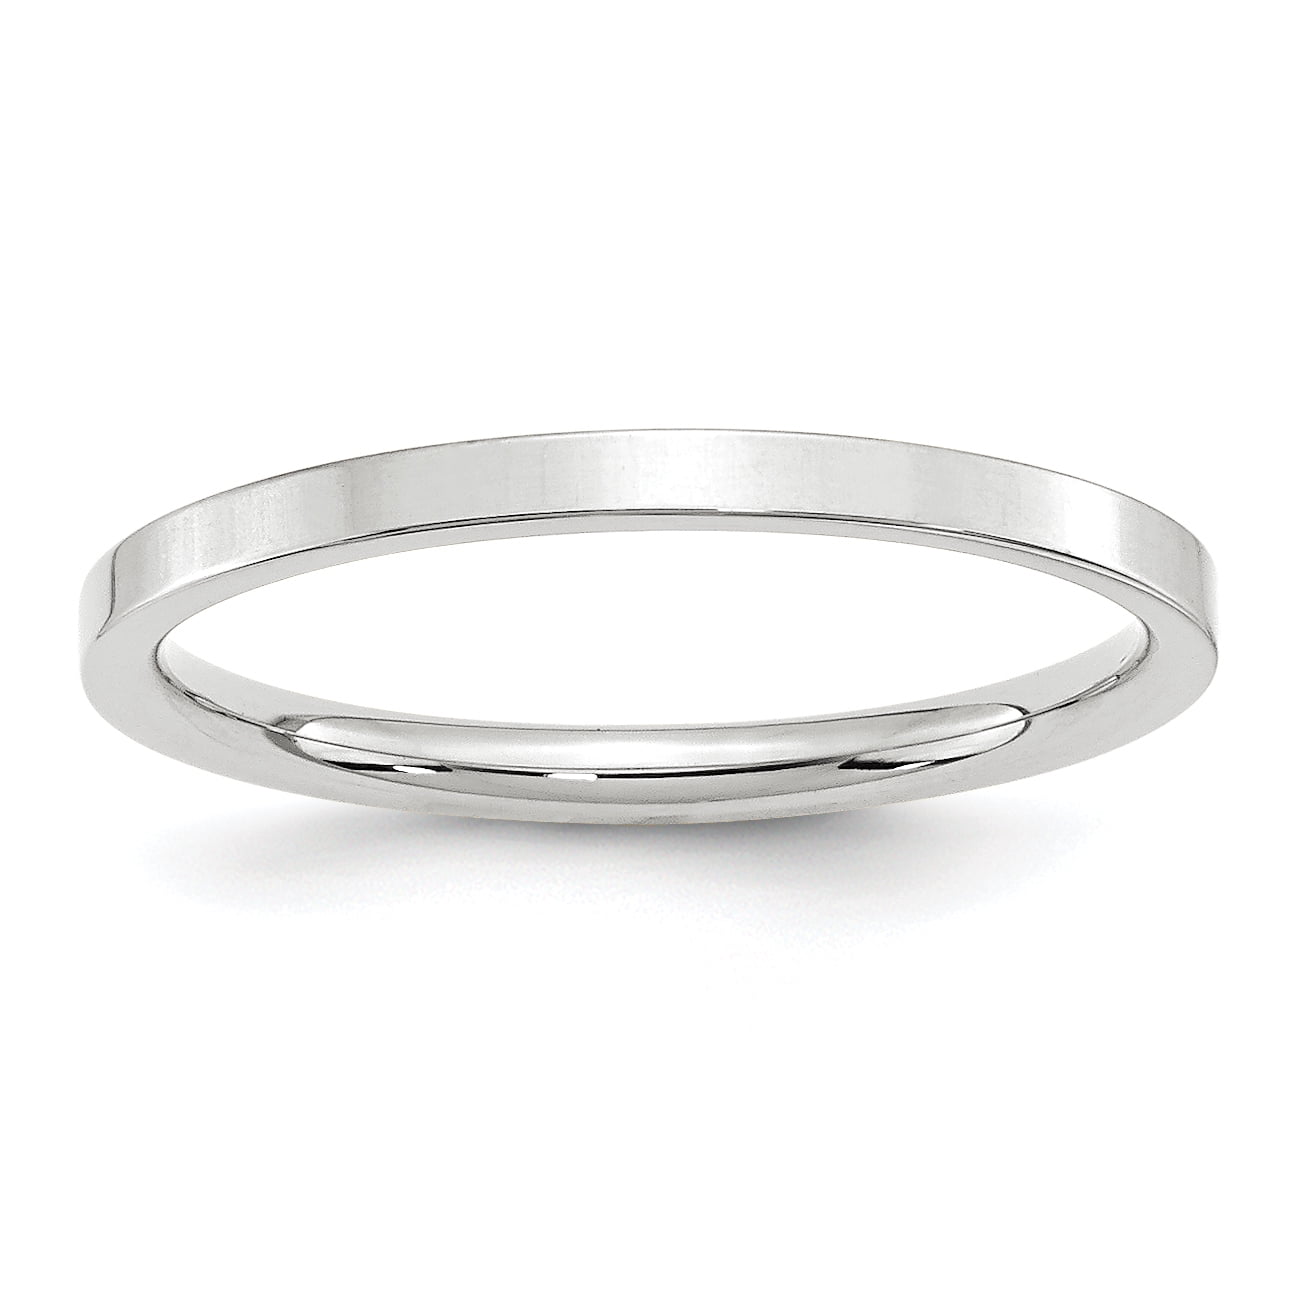 10K White Gold 2mm Standard Flat Comfort Fit Band Ring 